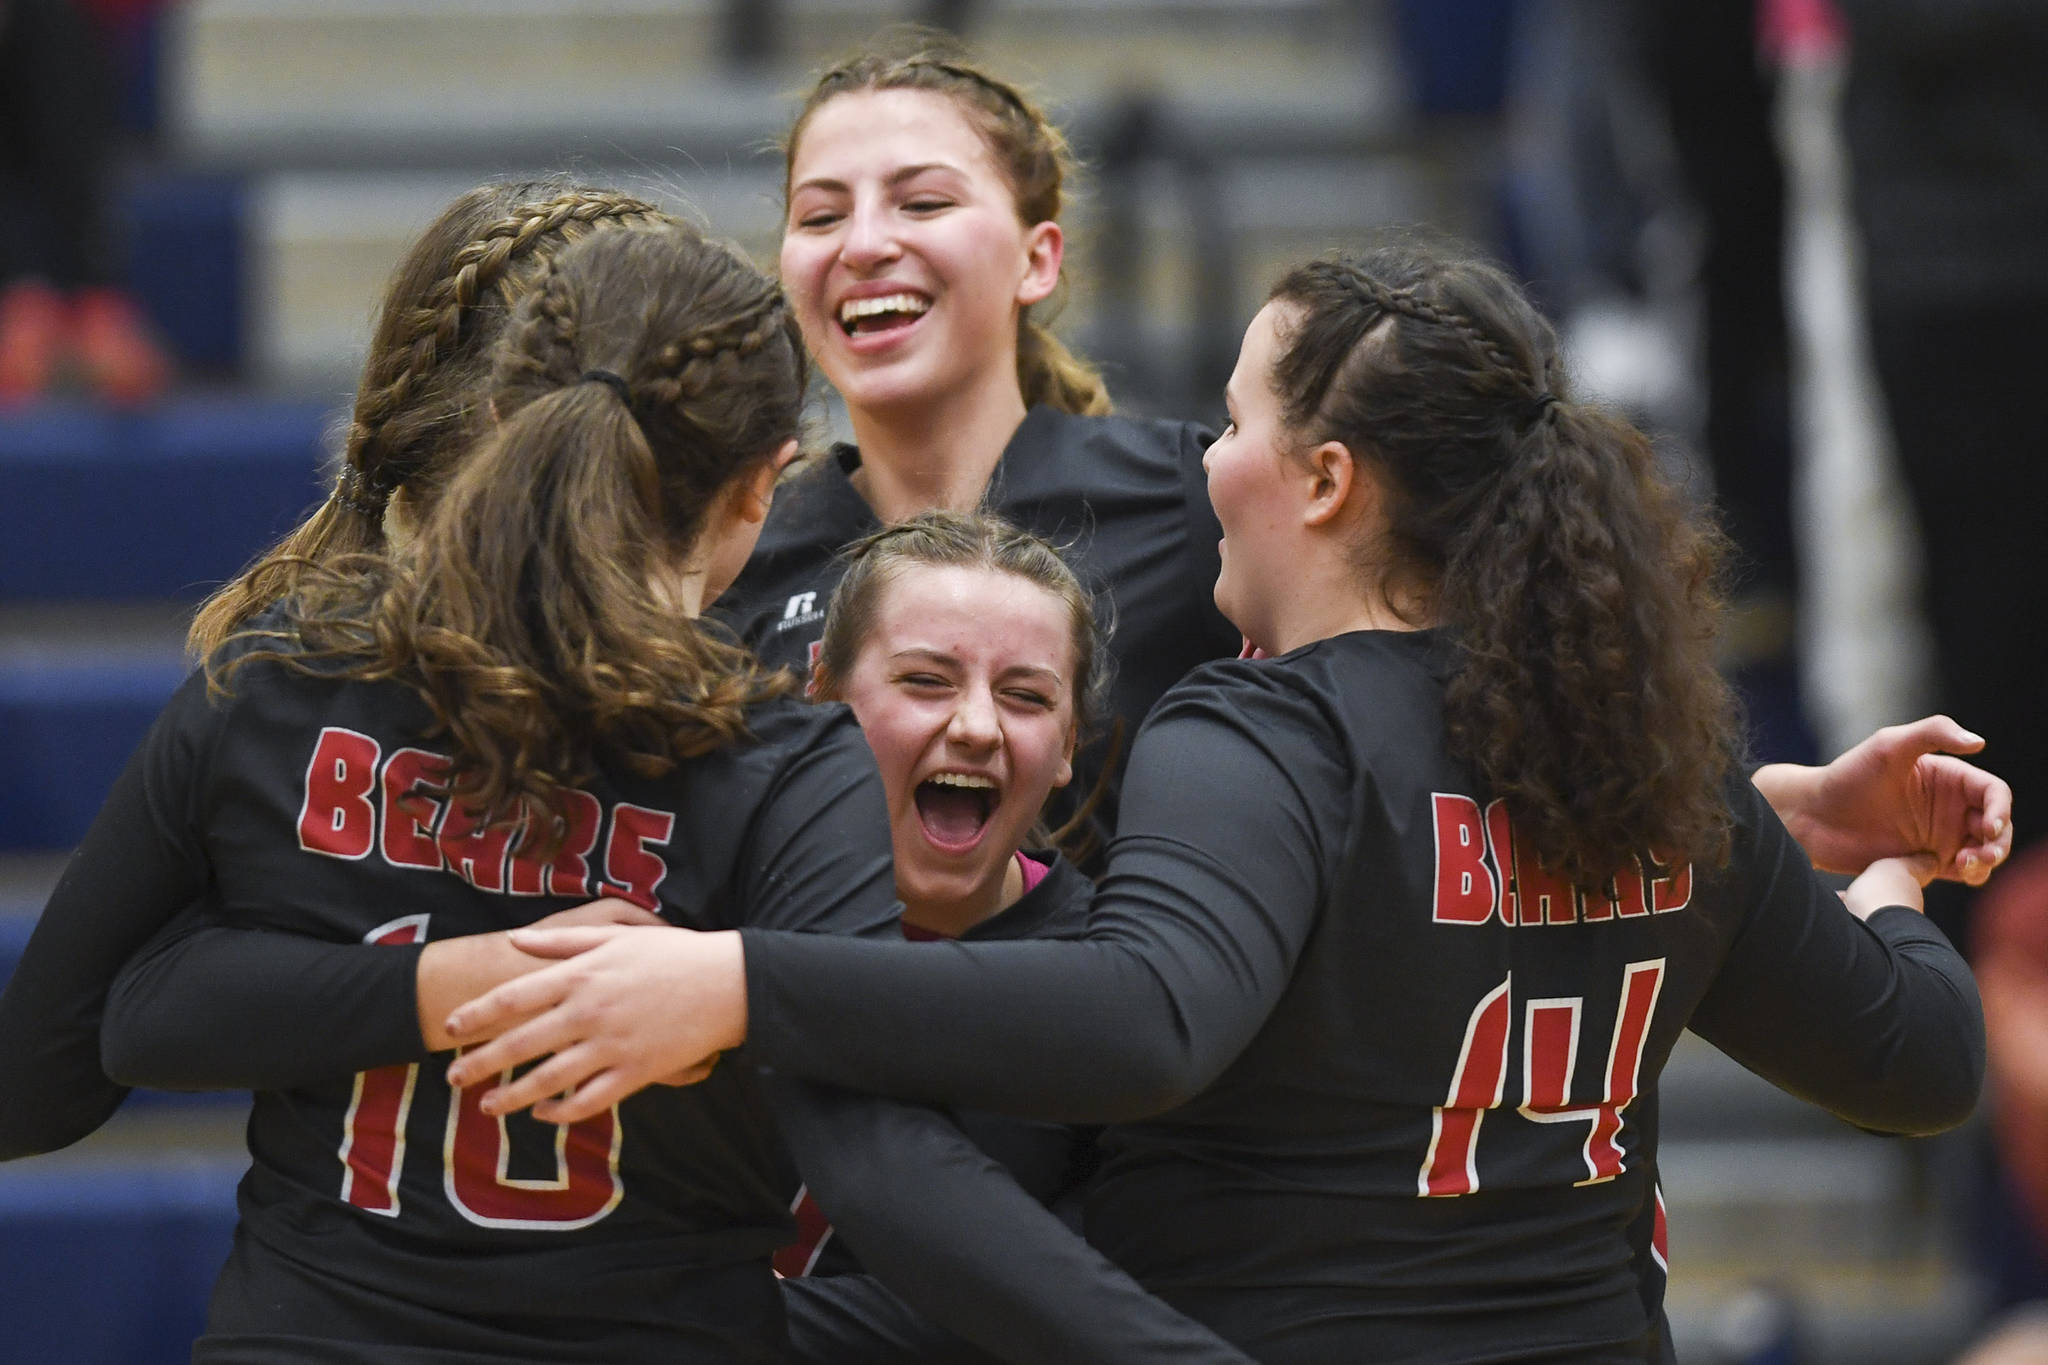 Juneau-Douglas’ Kiana Potter, center below, celebrates a point with her teammates against Thunder Mountain at Thunder Mountain High School on Friday, Oct. 4, 2019. (Michael Penn | Juneau Empire)